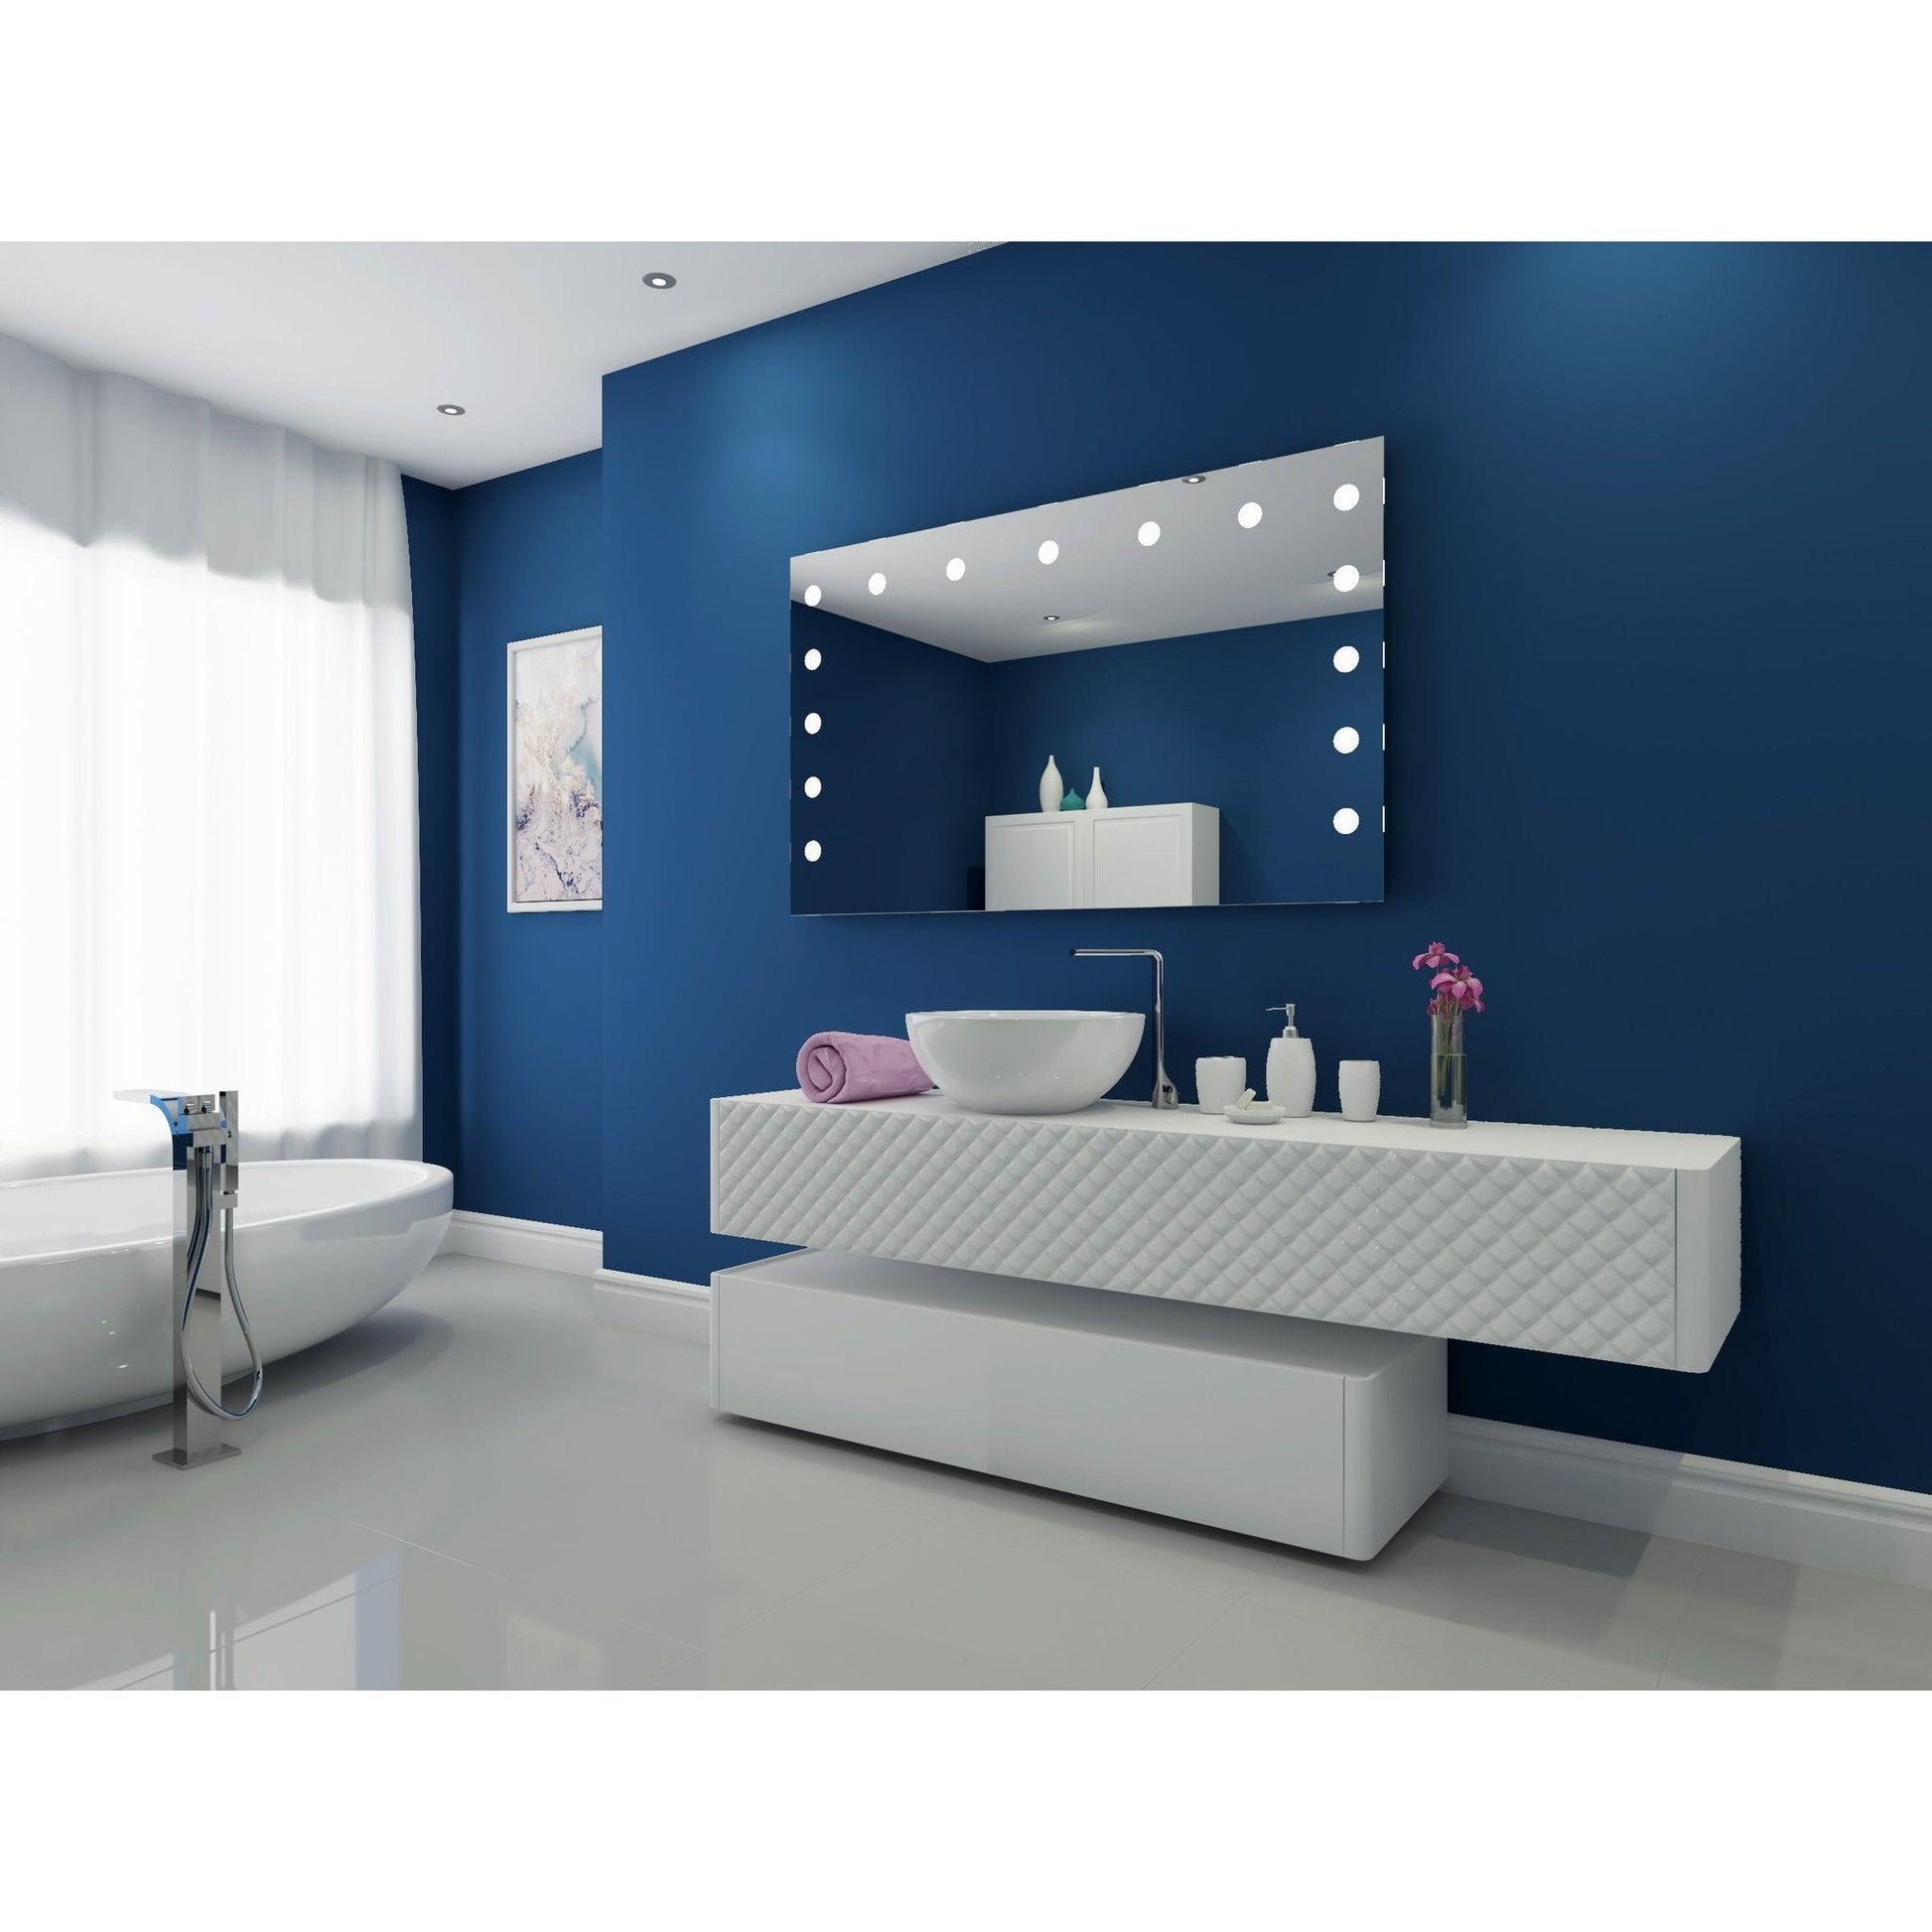 Paris Mirror Hollywood 60" x 36" Front-Lit Lighted Super Bright Dimmable Wall-Mounted 6000K LED Mirror